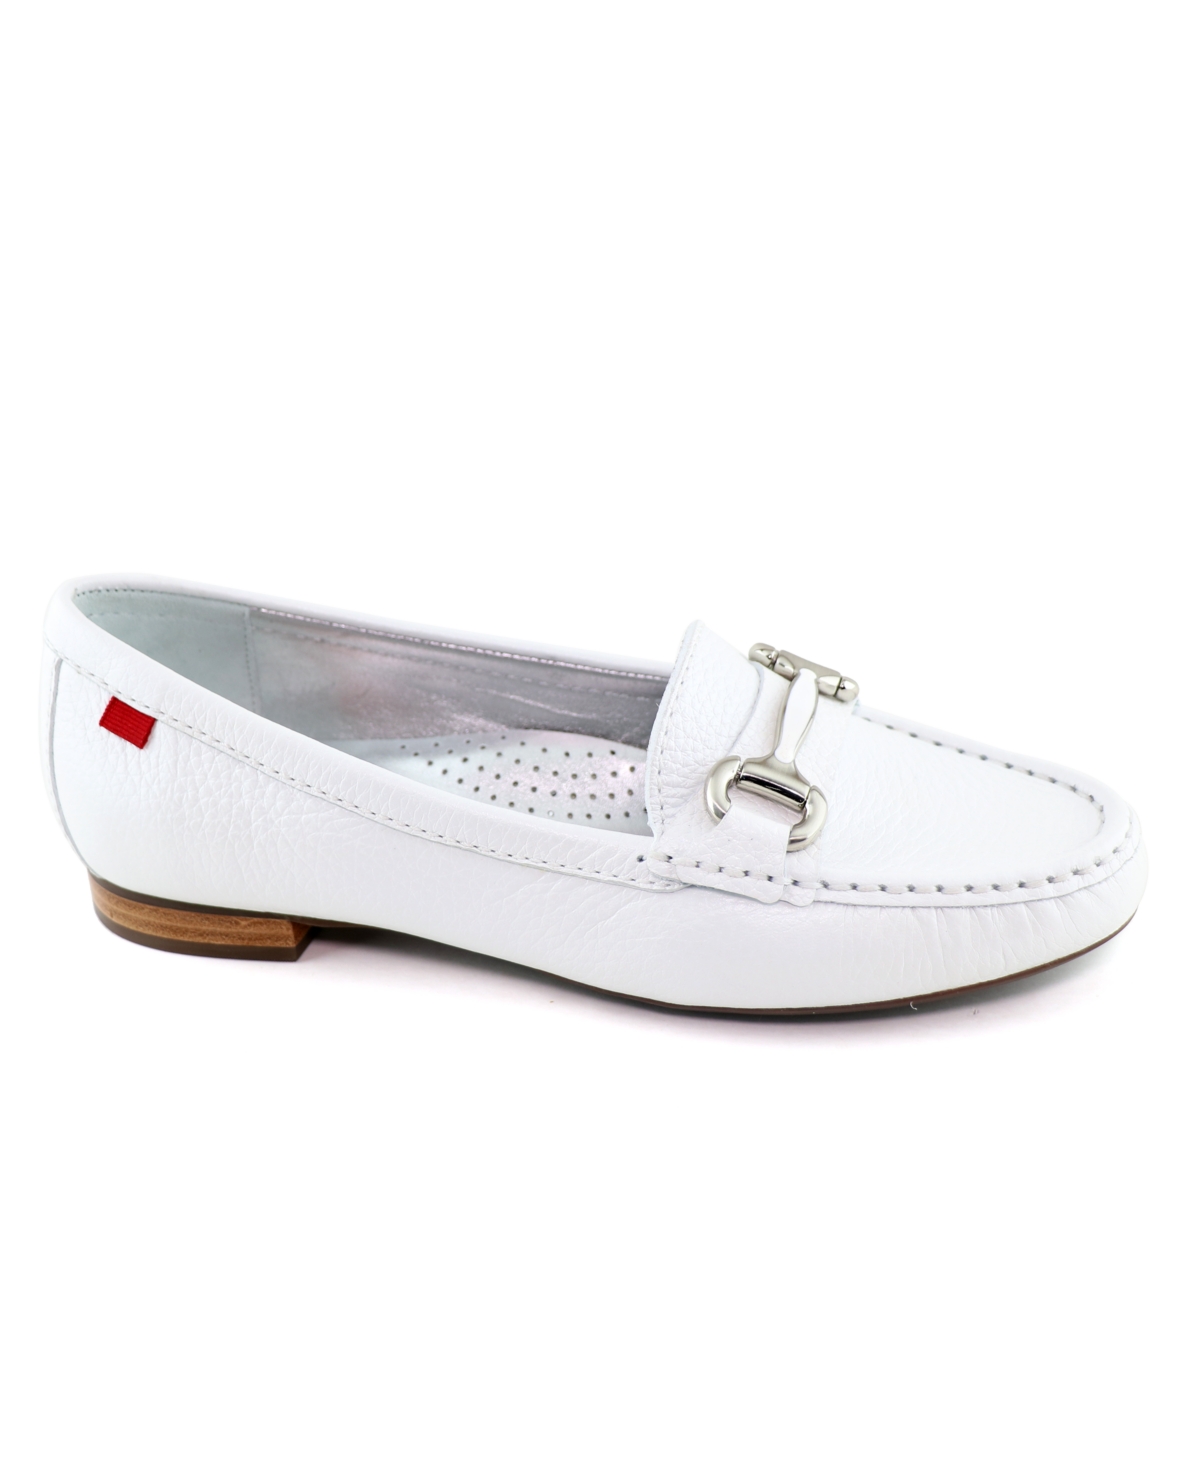 Women's Grand Street Classic Loafers - Pepper Red Grainy